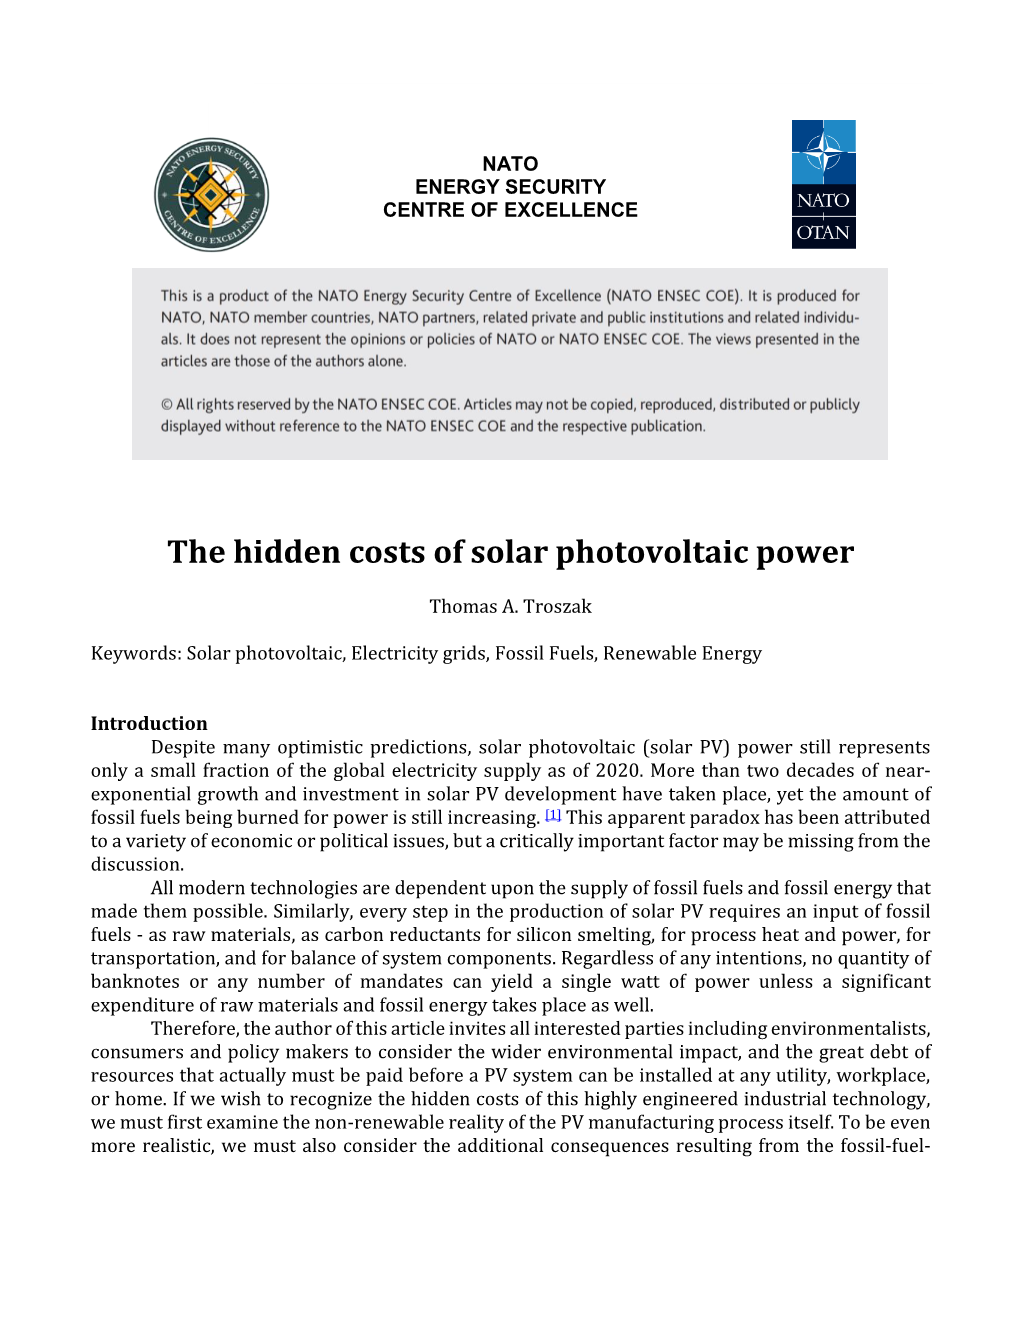 The Hidden Costs of Solar Photovoltaic Power